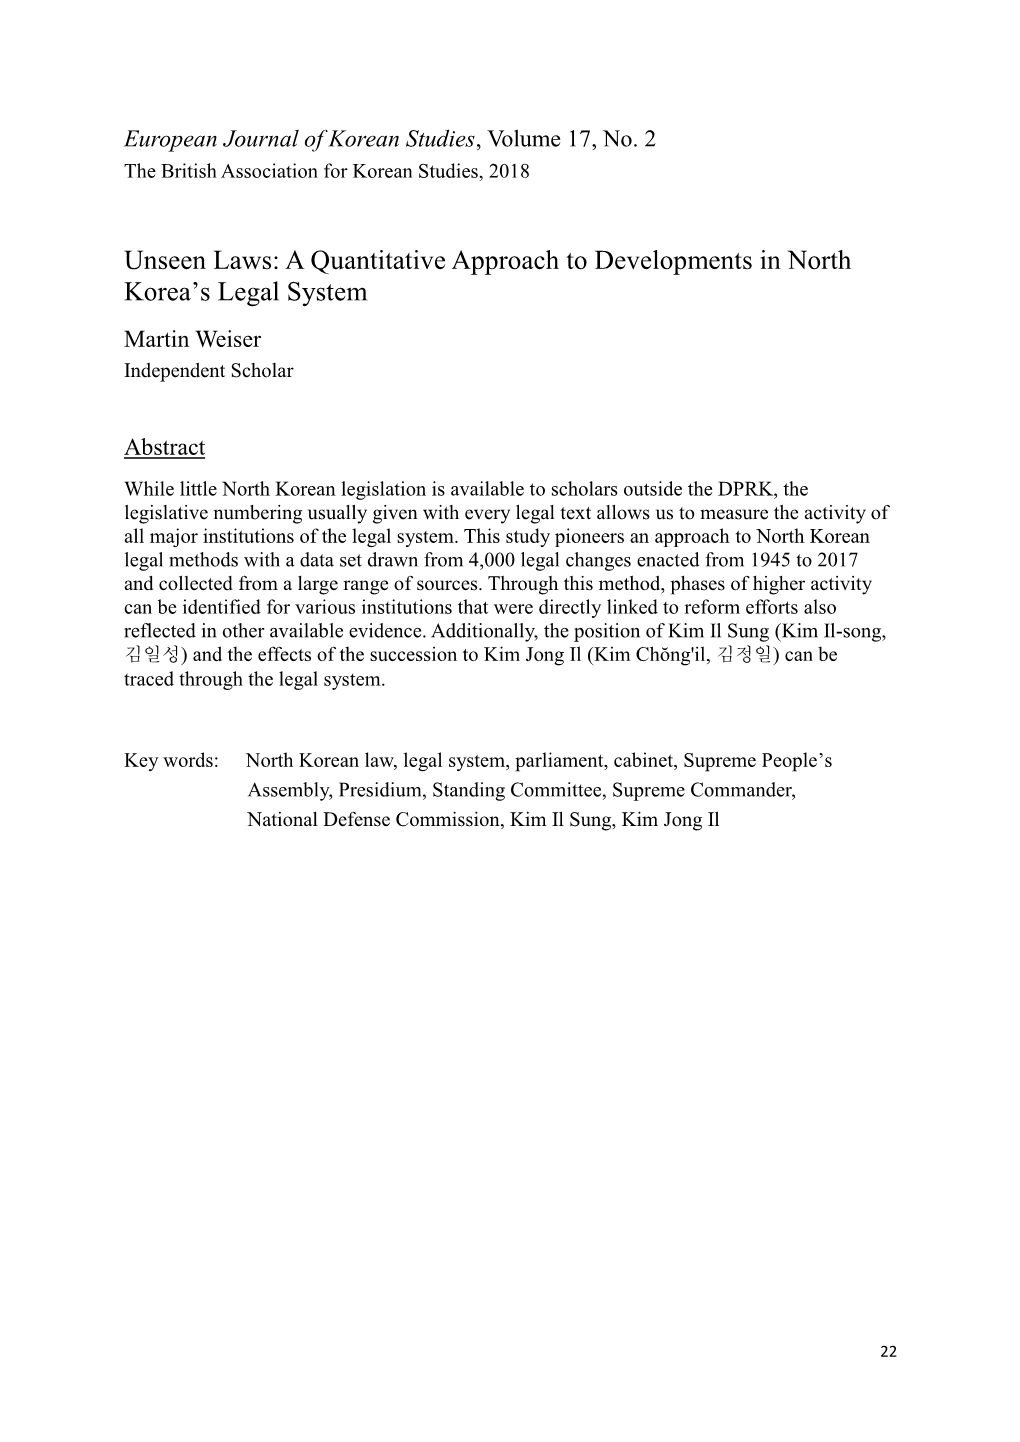 Unseen Laws: a Quantitative Approach to Developments in North Korea’S Legal System